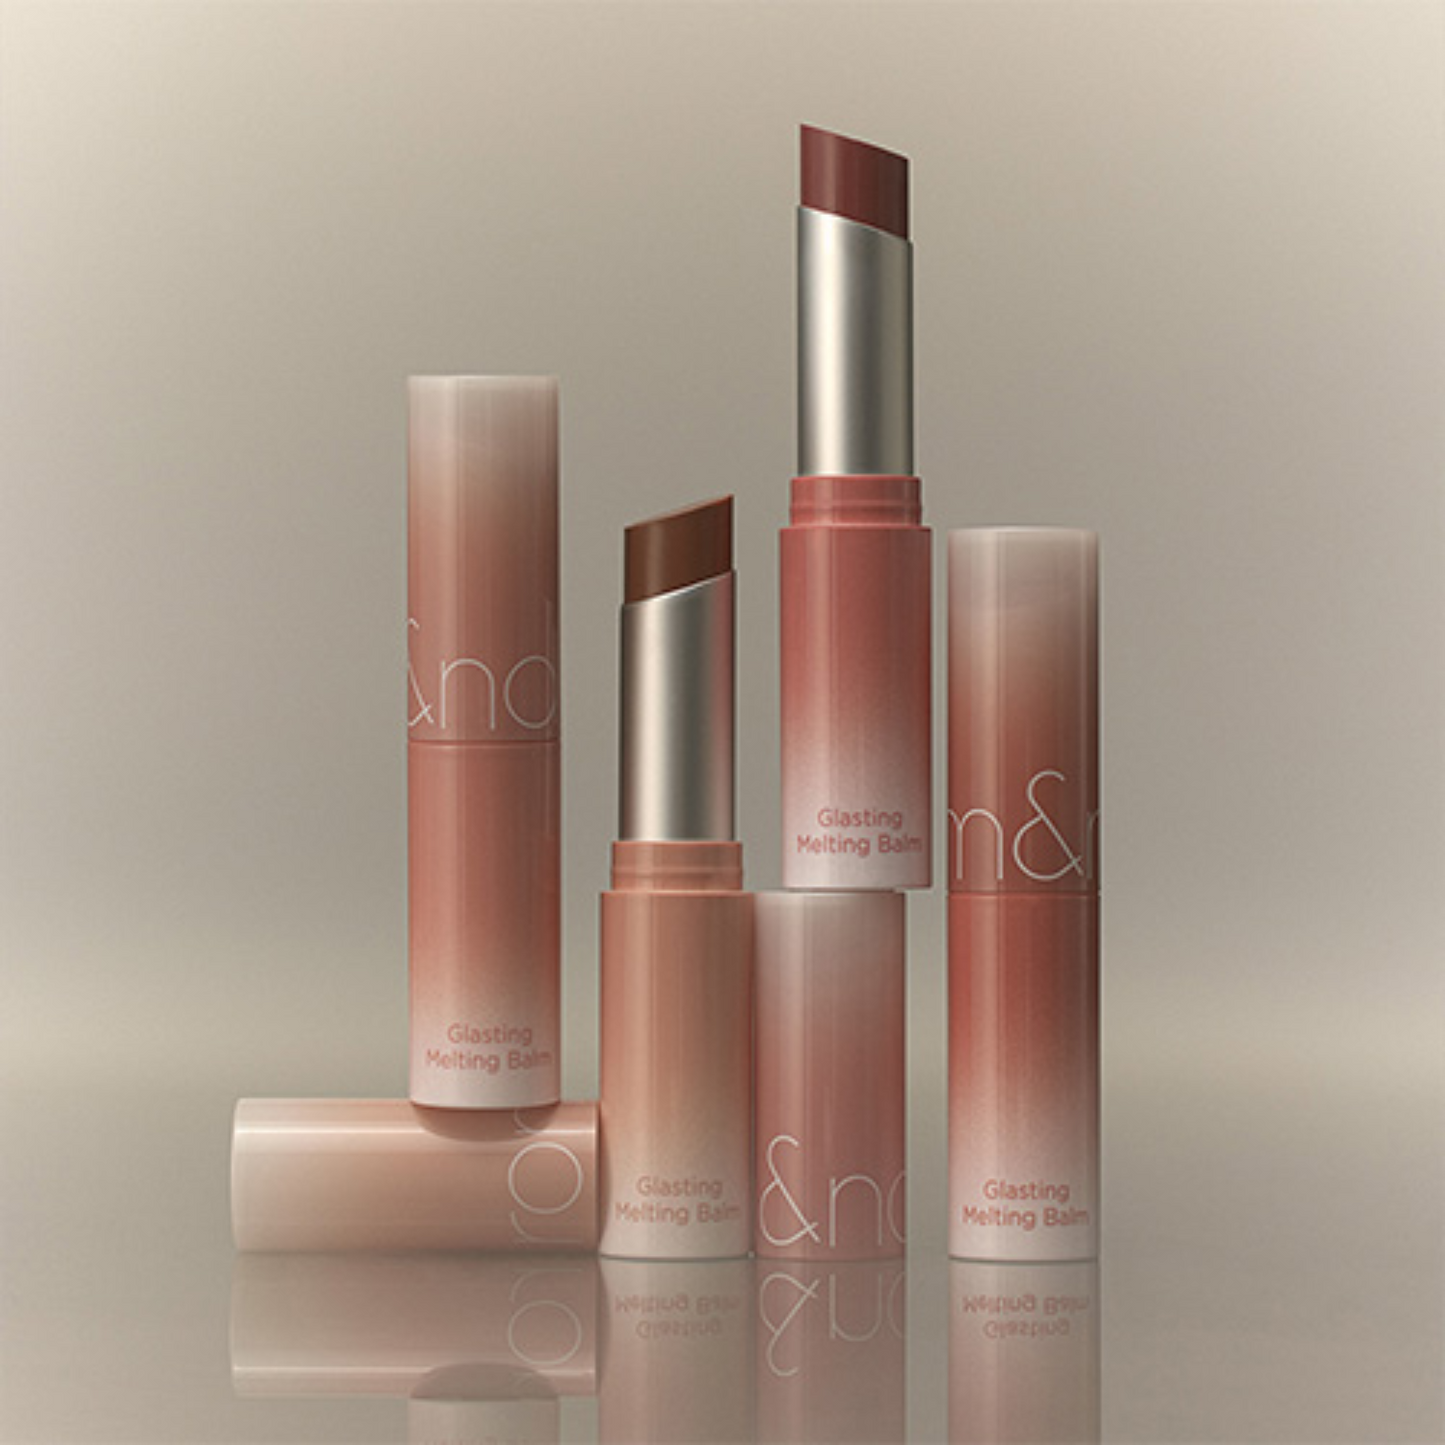 Rom&nd GLASTING MELTING BALM Dusty On The Nude Edition (3 Colors)